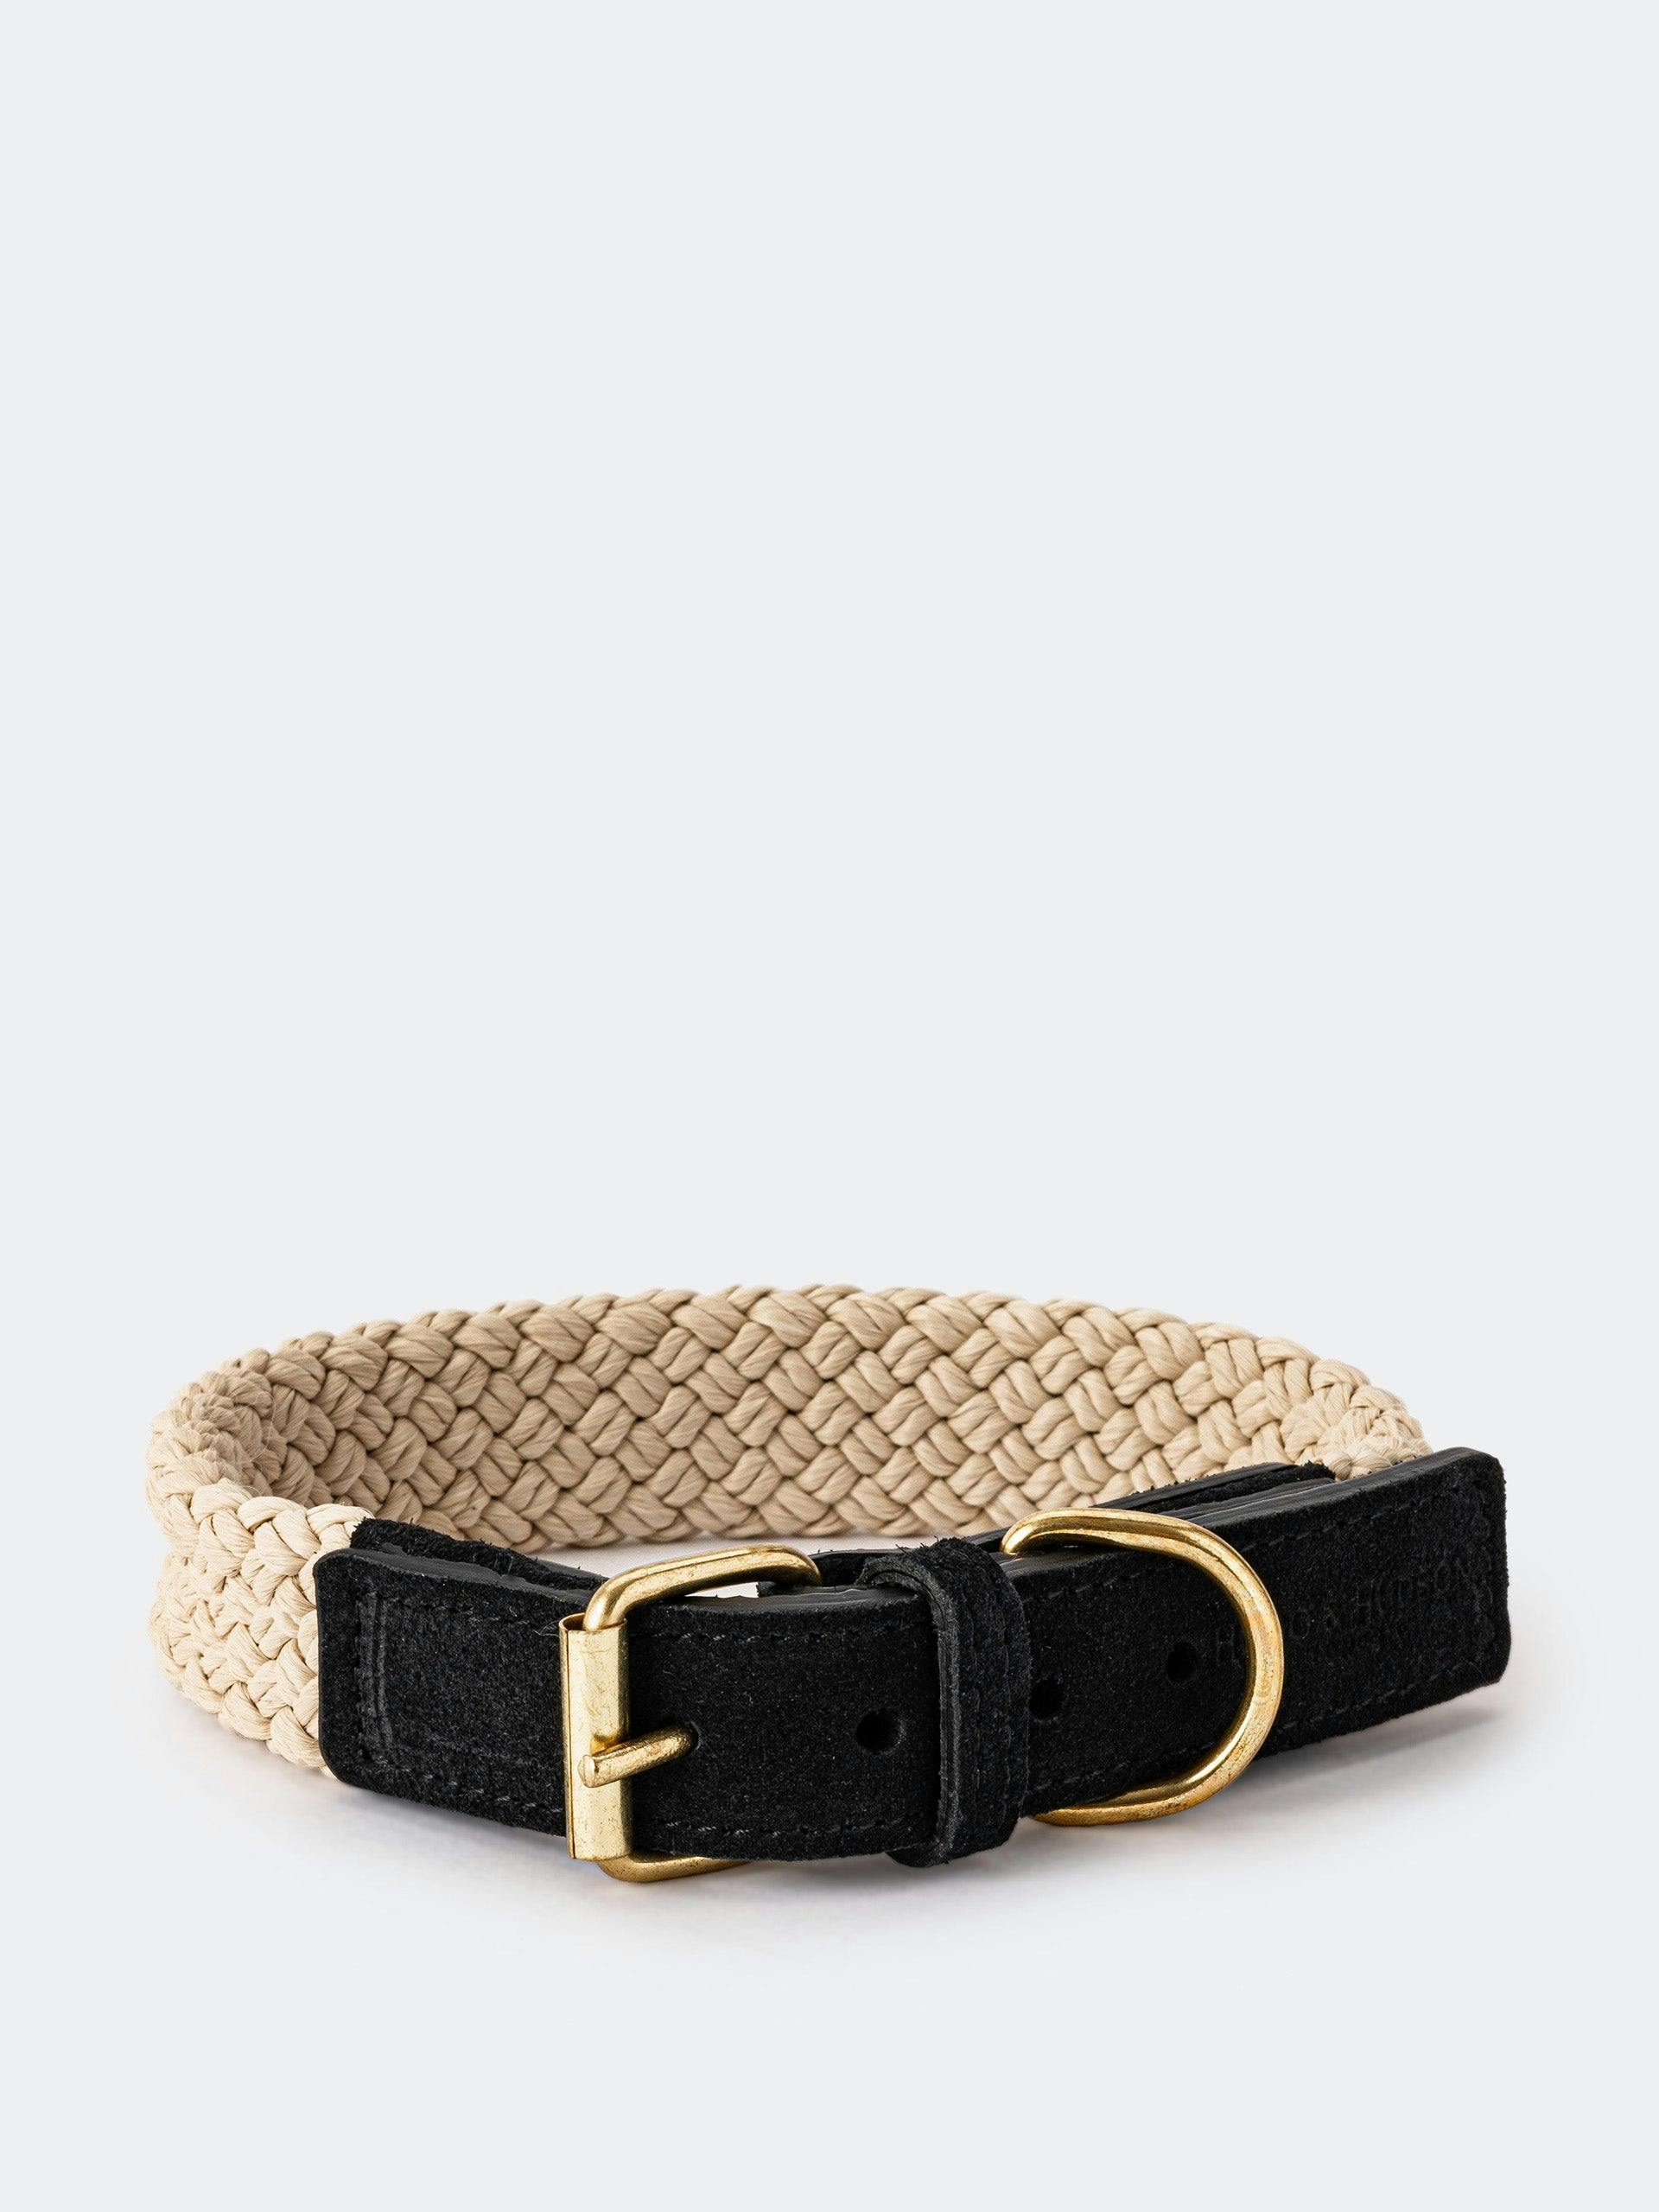 Black flat rope and leather dog collar